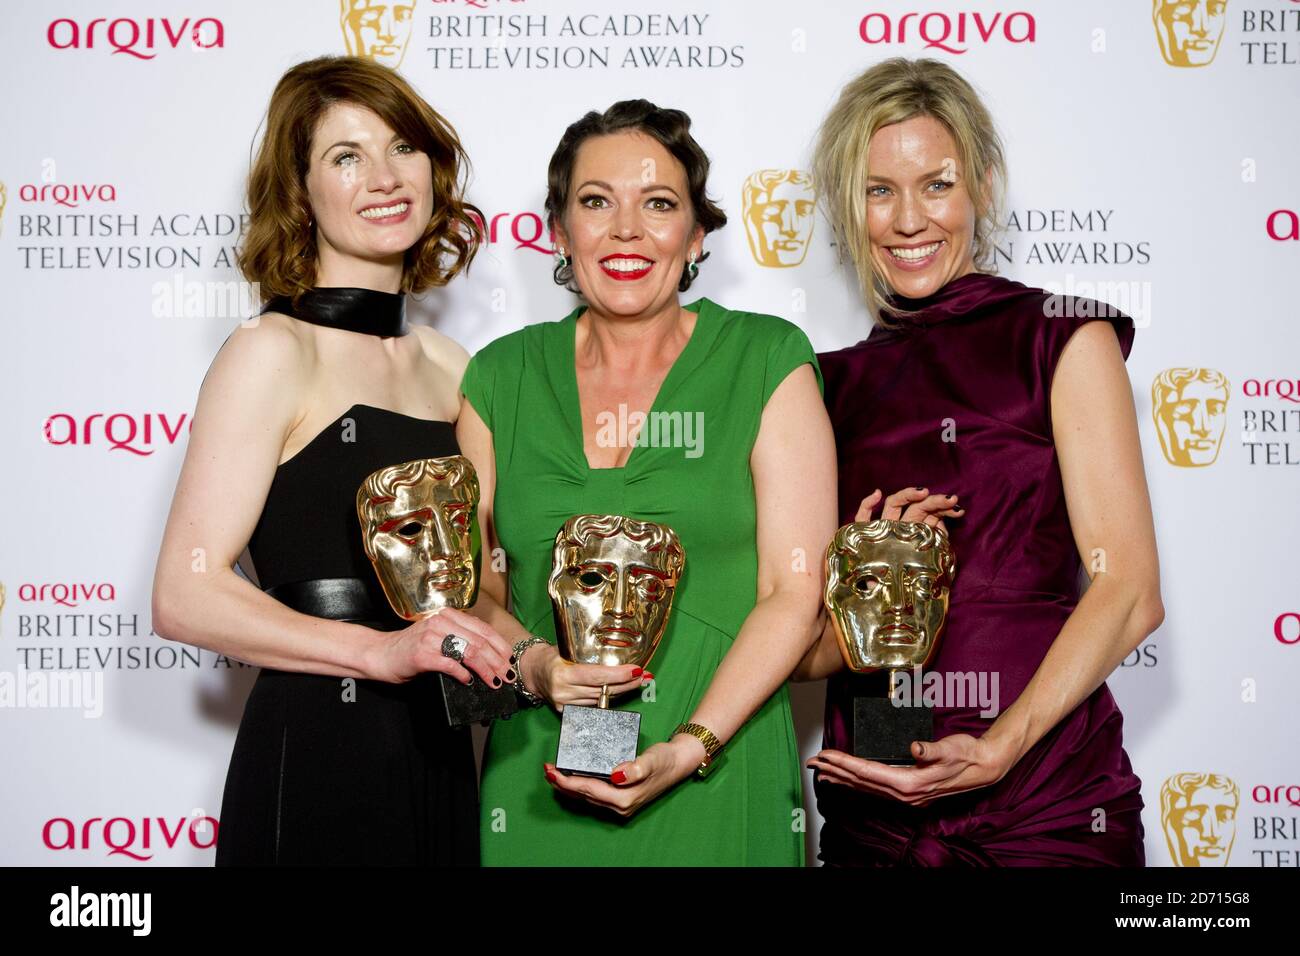 (left to right) Jodie Whittaker, Olivia Colman and Simone McAullay with the Drama Series Award for Broadchurch, at the 2014 Arqiva British Academy Television Awards at the Theatre Royal, Drury Lane, London. Stock Photo